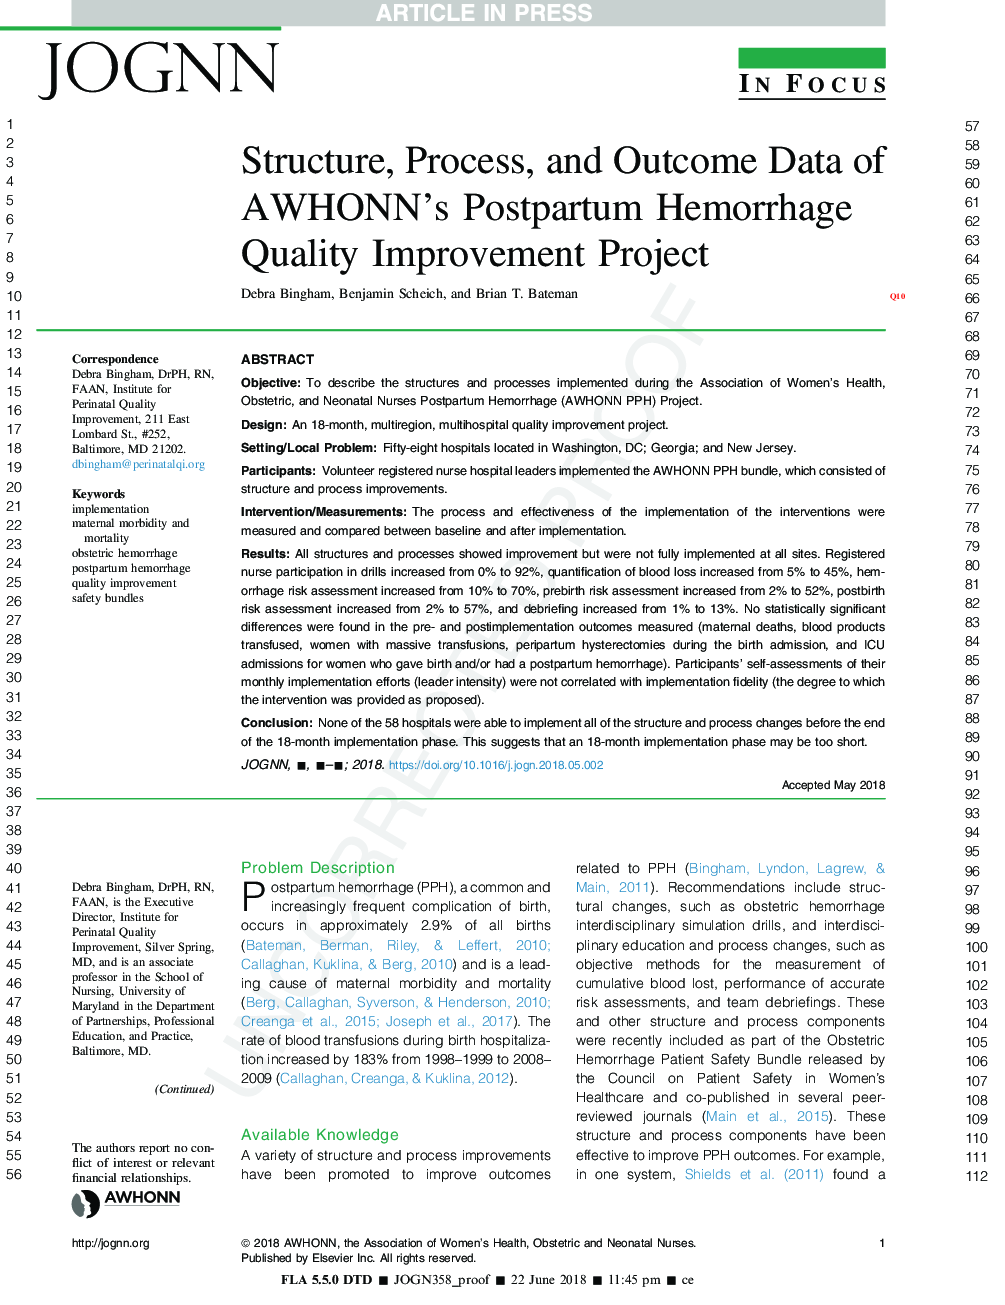 Structure, Process, and Outcome Data of AWHONN's Postpartum Hemorrhage Quality Improvement Project